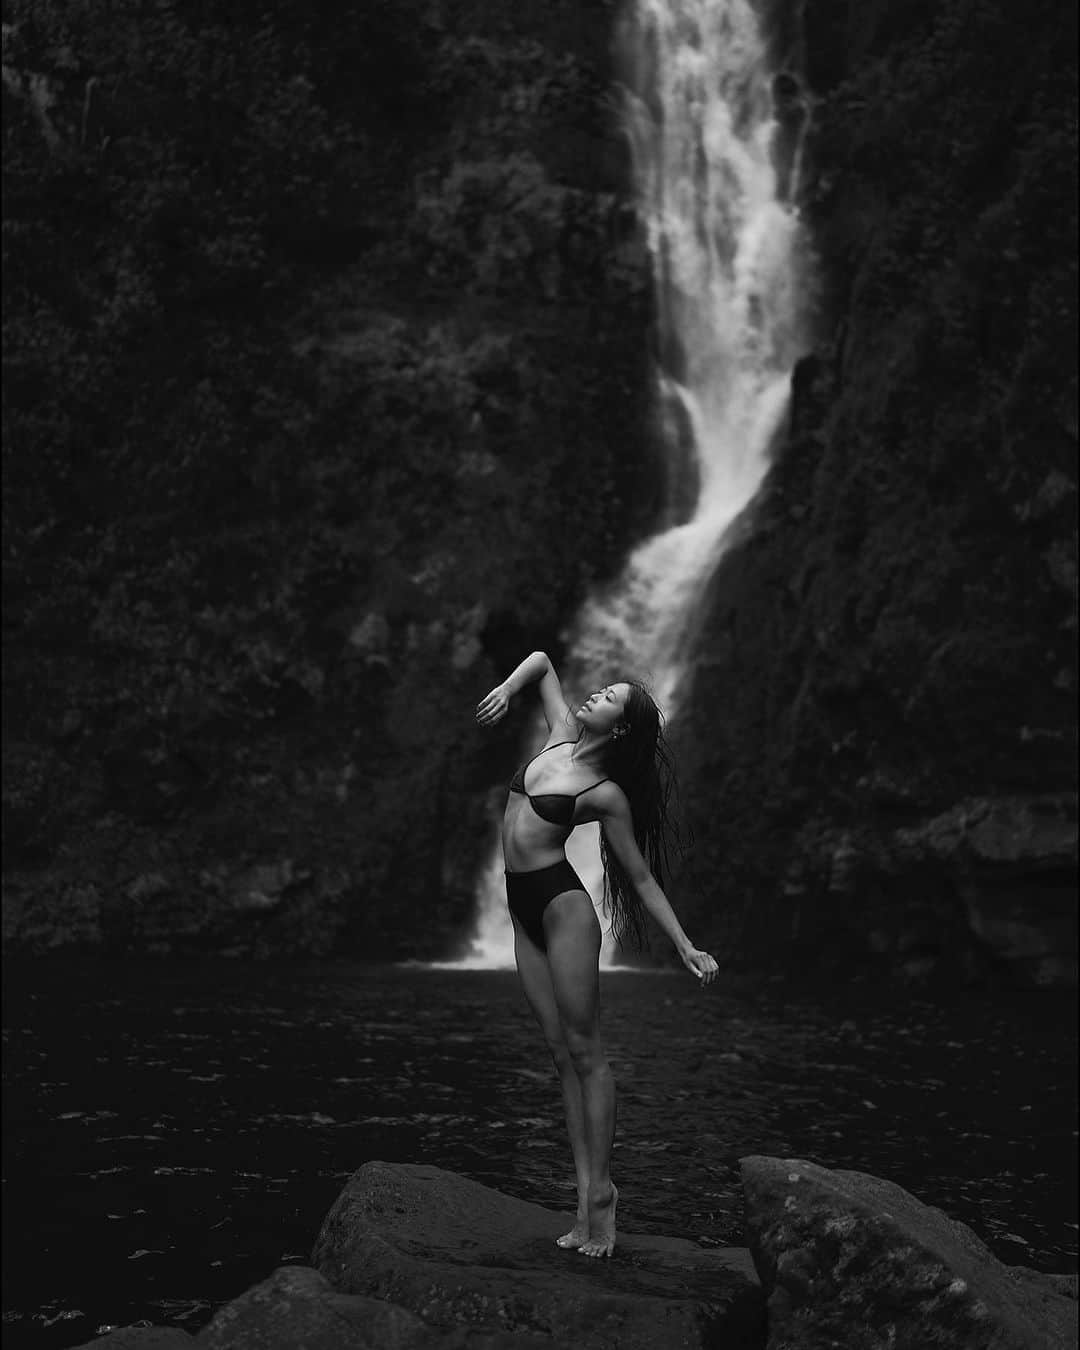 ballerina projectさんのインスタグラム写真 - (ballerina projectInstagram)「𝐋𝐚𝐫𝐢𝐬𝐬𝐚 𝐋𝐞𝐮𝐧𝐠 at Moa’lua Falls on the island of Molokai.   @larissaleung_ #larissaleung #ballerinaproject #molokai #moaulafalls #hawaii #waterfall   Ballerina Project 𝗹𝗮𝗿𝗴𝗲 𝗳𝗼𝗿𝗺𝗮𝘁 𝗹𝗶𝗺𝗶𝘁𝗲𝗱 𝗲𝗱𝘁𝗶𝗼𝗻 𝗽𝗿𝗶𝗻𝘁𝘀 and 𝗜𝗻𝘀𝘁𝗮𝘅 𝗰𝗼𝗹𝗹𝗲𝗰𝘁𝗶𝗼𝗻𝘀 on sale in our Etsy store. Link is located in our bio.  𝙎𝙪𝙗𝙨𝙘𝙧𝙞𝙗𝙚 to the 𝐁𝐚𝐥𝐥𝐞𝐫𝐢𝐧𝐚 𝐏𝐫𝐨𝐣𝐞𝐜𝐭 on Instagram to have access to exclusive and never seen before content. 🩰」11月6日 21時54分 - ballerinaproject_